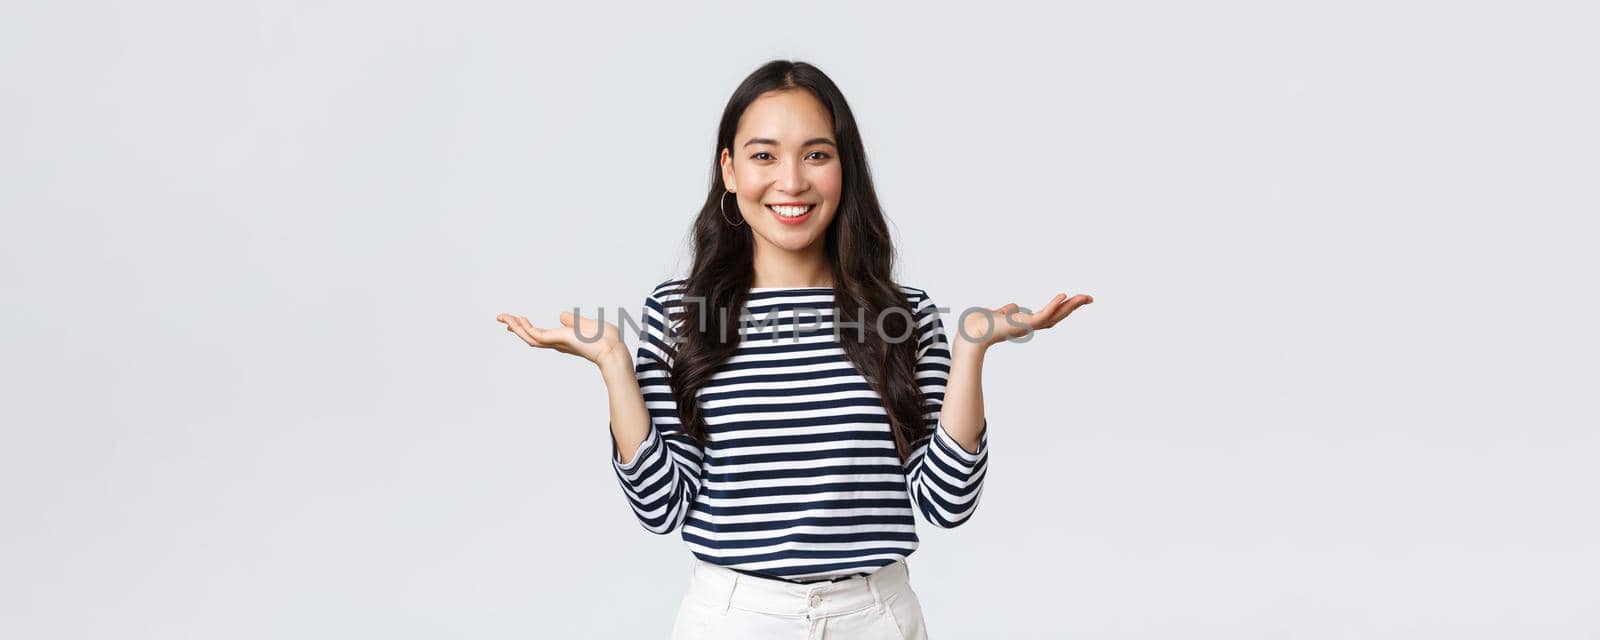 Lifestyle, people emotions and casual concept. Cute smiling asian woman introduce two products, hold hands sideways as if demonstrating products on palms, standing white background.